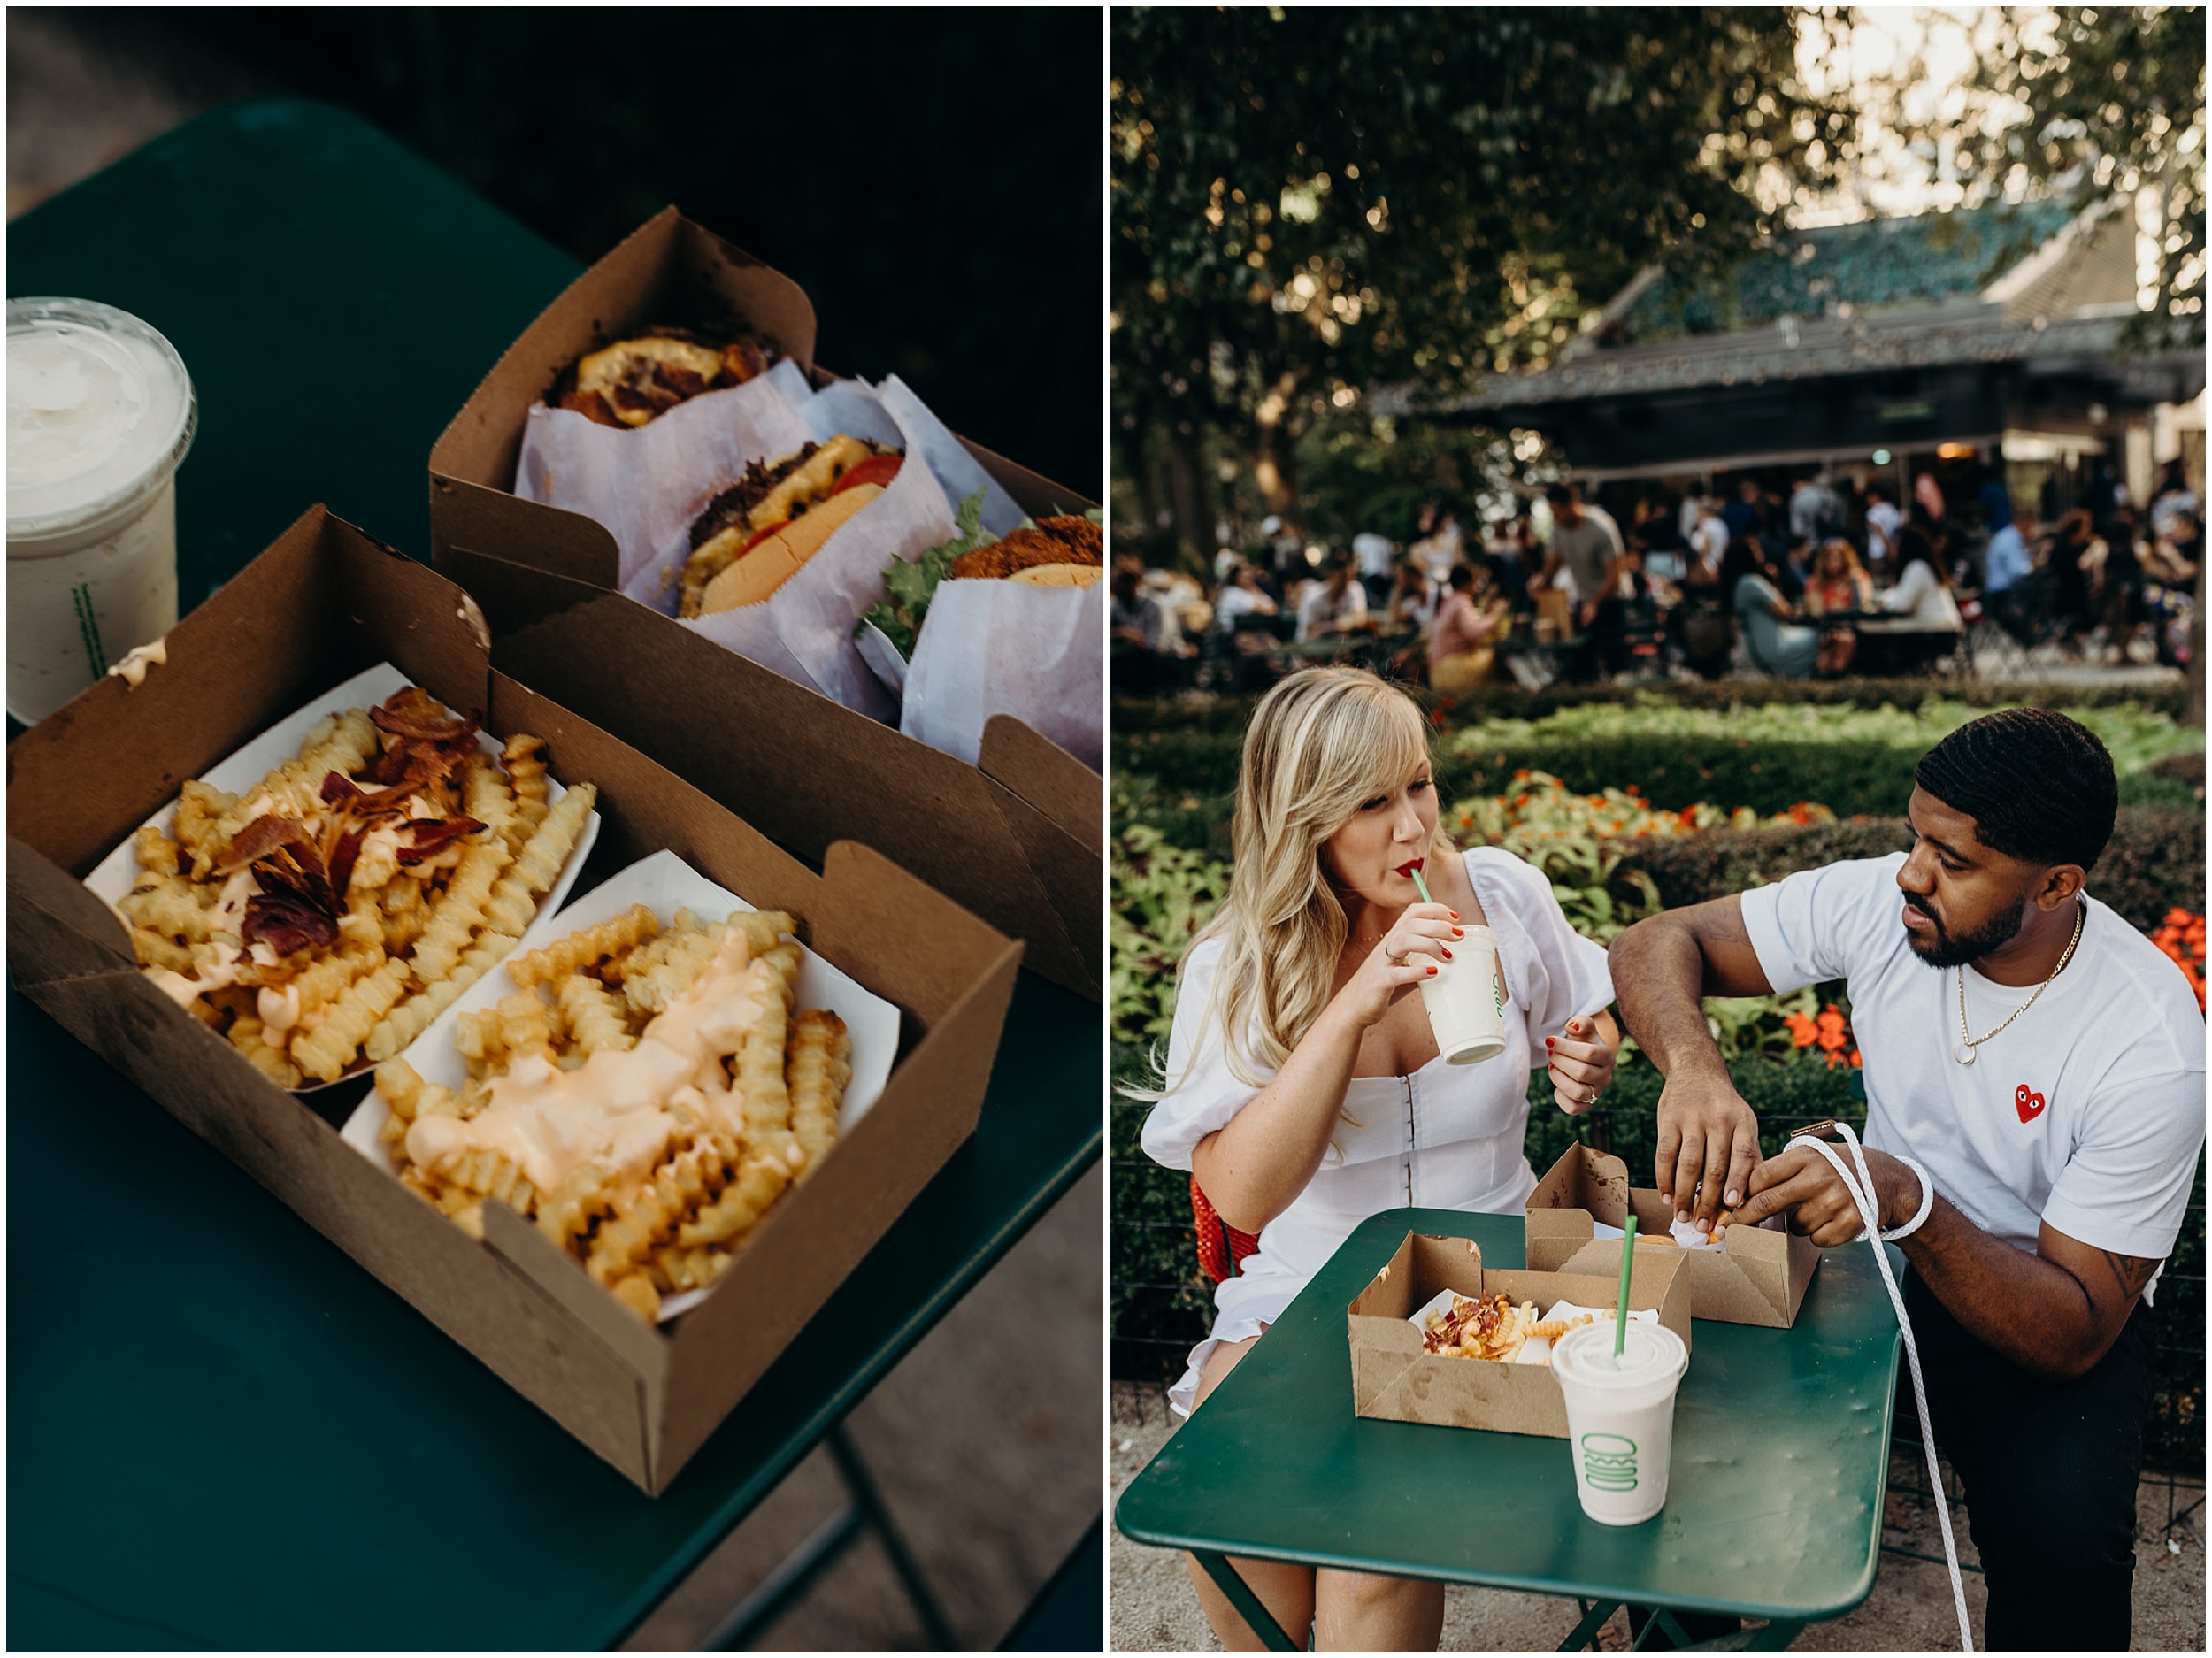 engagement session at shake shack in madison square park, manhattan, nyc